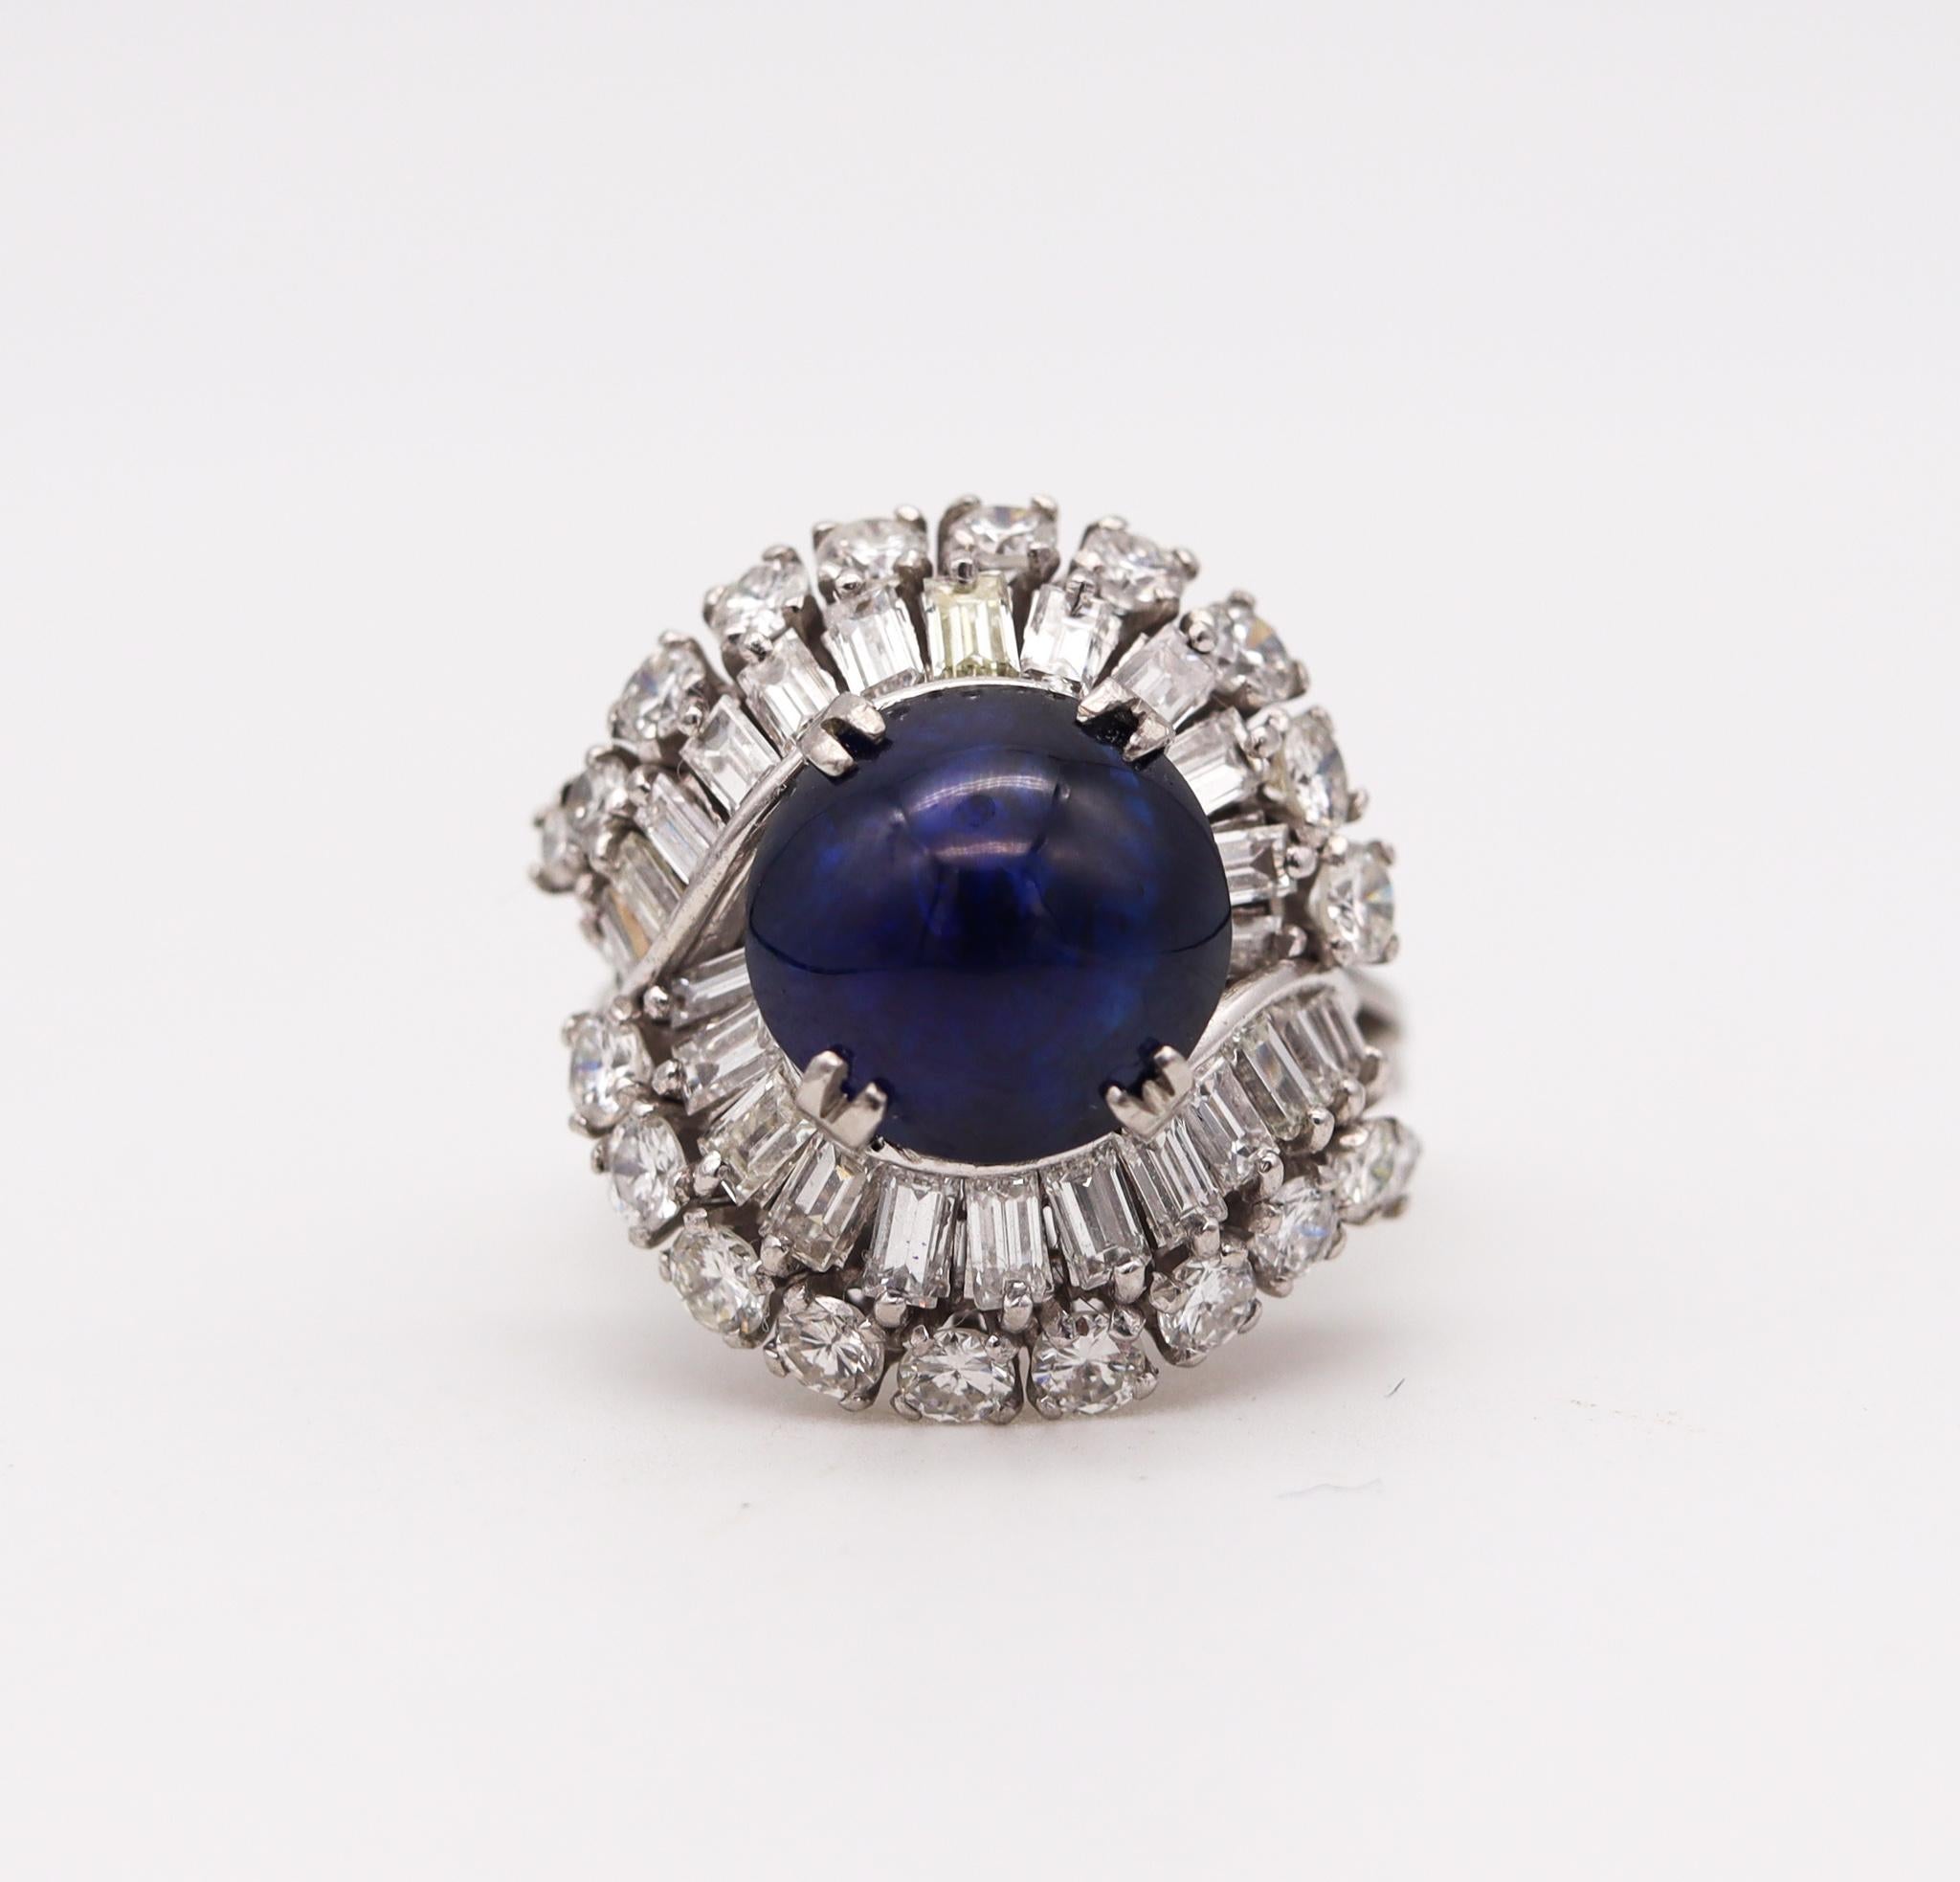 Women's Art Deco 1930 Gia Certified Platinum Cocktail Ring With 8.07 Ctw Pailin Sapphire